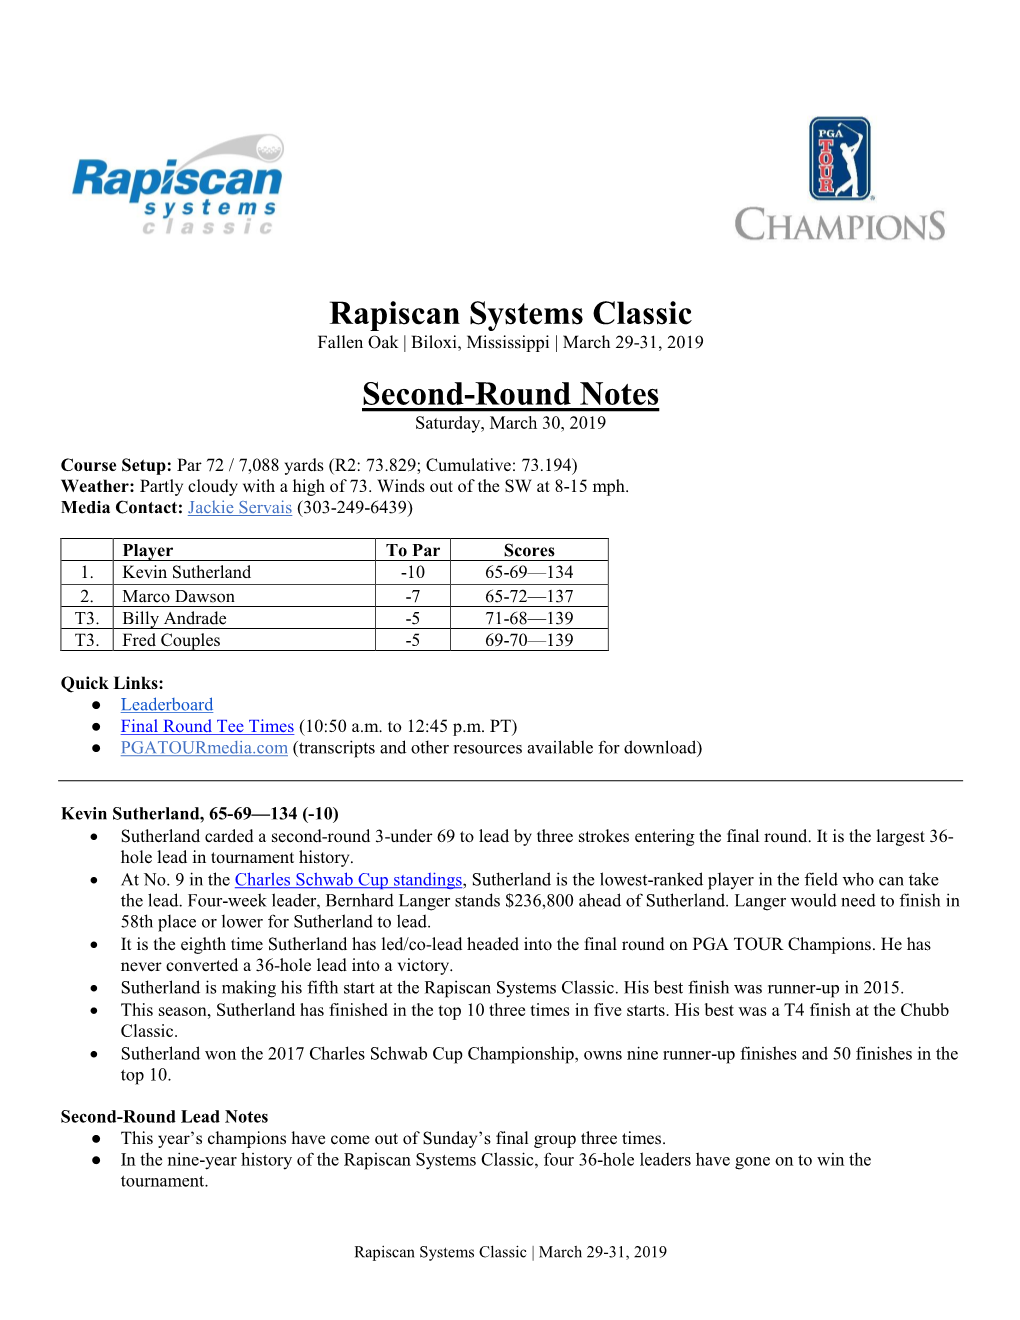 Rapiscan Systems Classic Second-Round Notes